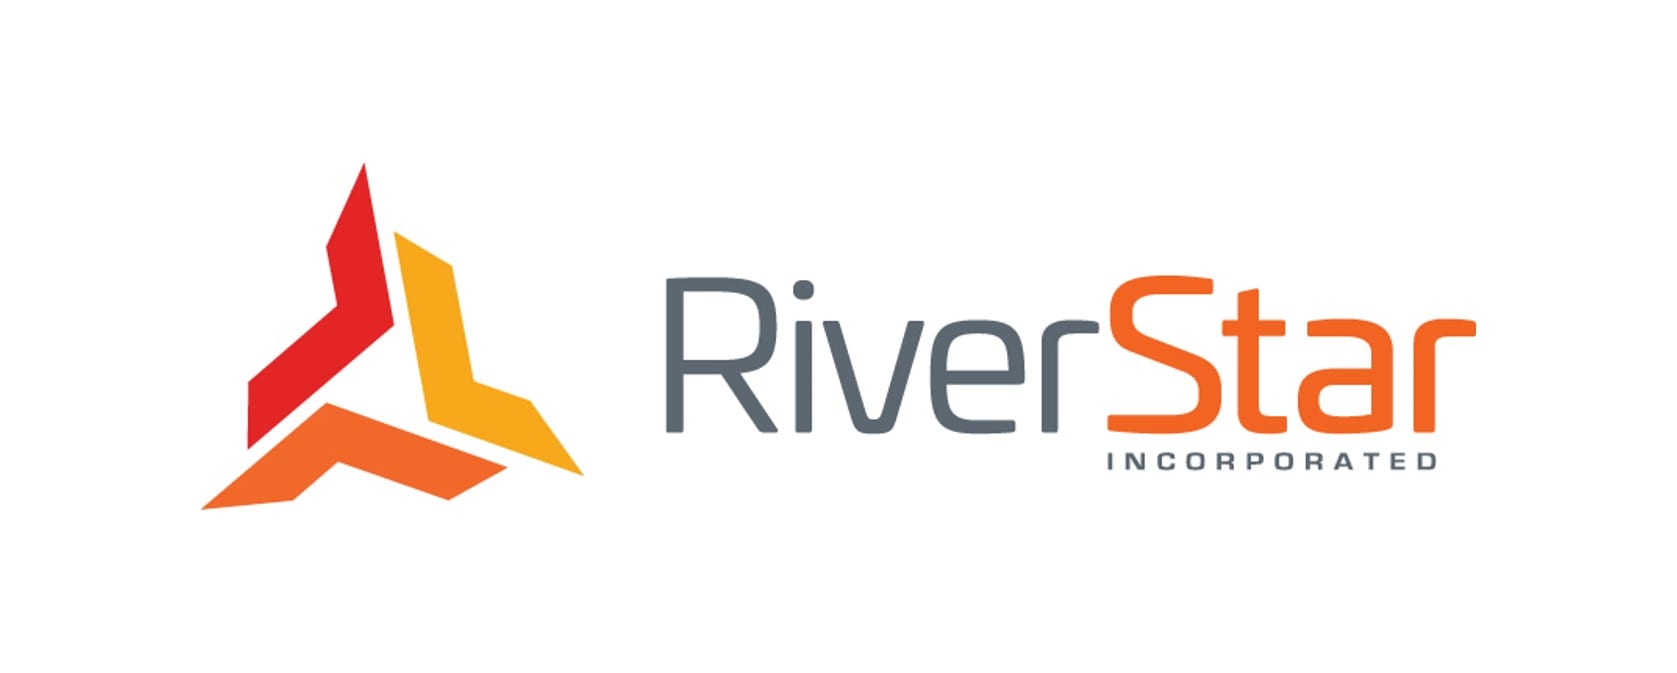 River Star Logo - Riverstar Contract Manufacturing | OEM & Brands Fulfillment Services